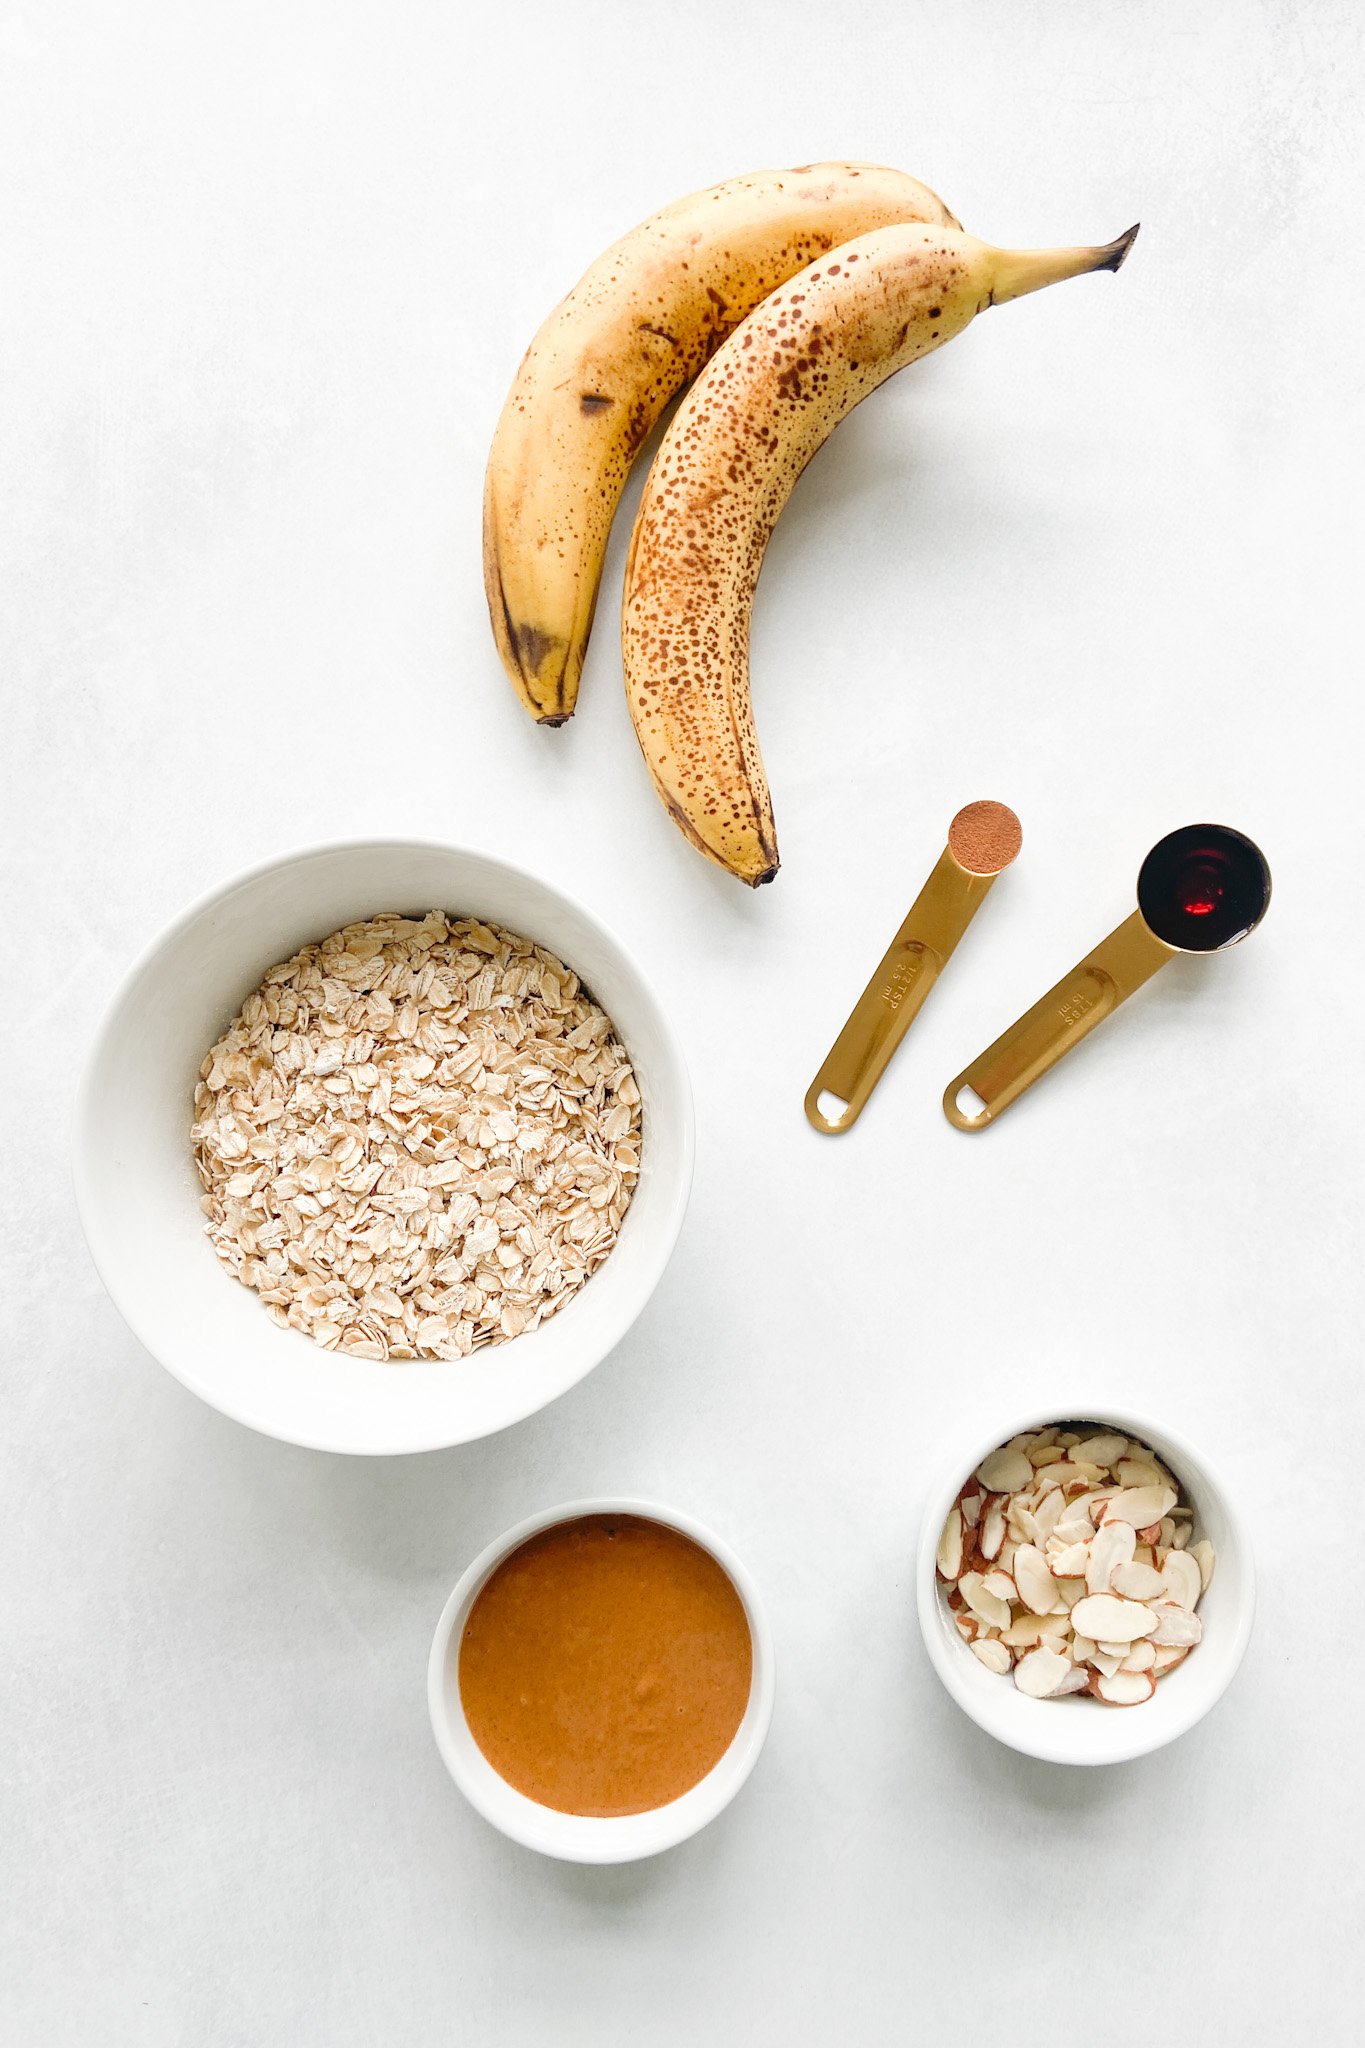 Ingredients to make peanut butter and banana granola bars. See recipe card for detailed ingredient quantities.